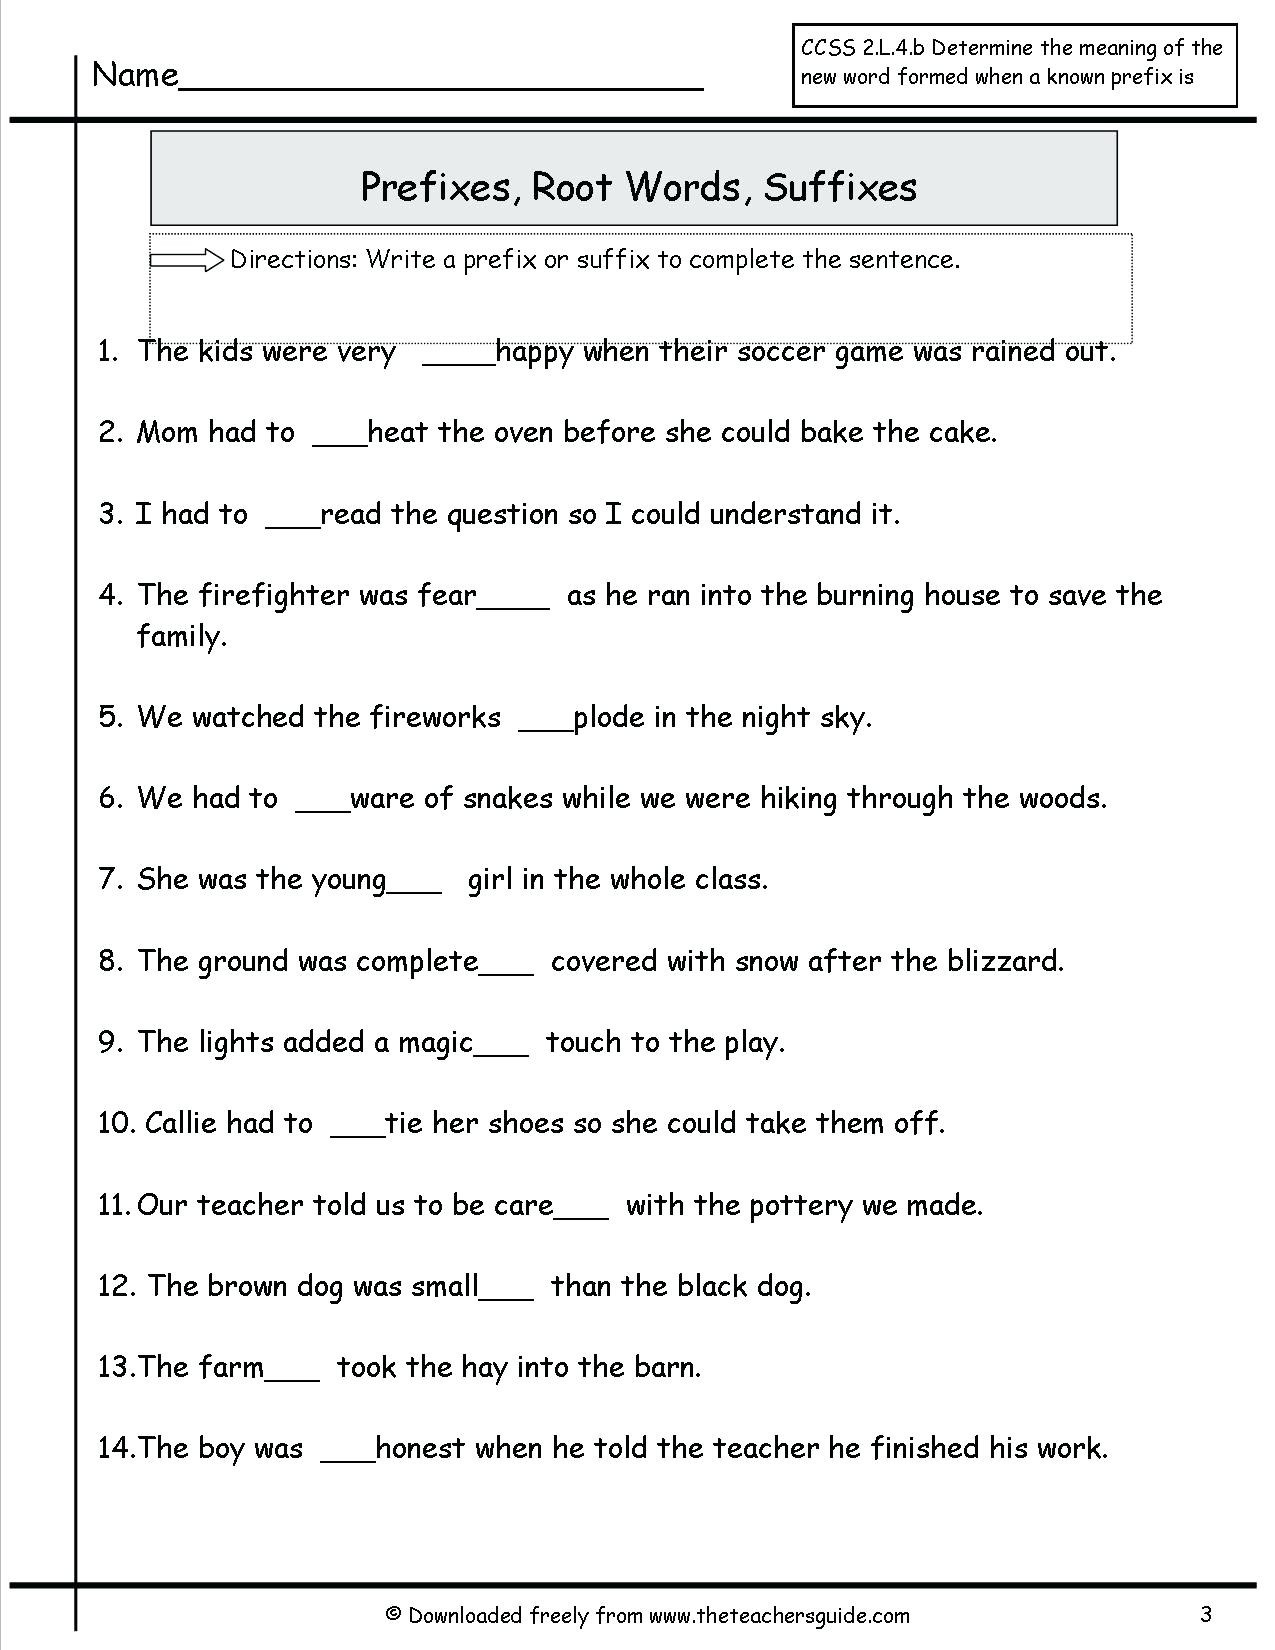 Suffixes Worksheets 4th Grade Suffix Activities Suffix Able Worksheets and Words